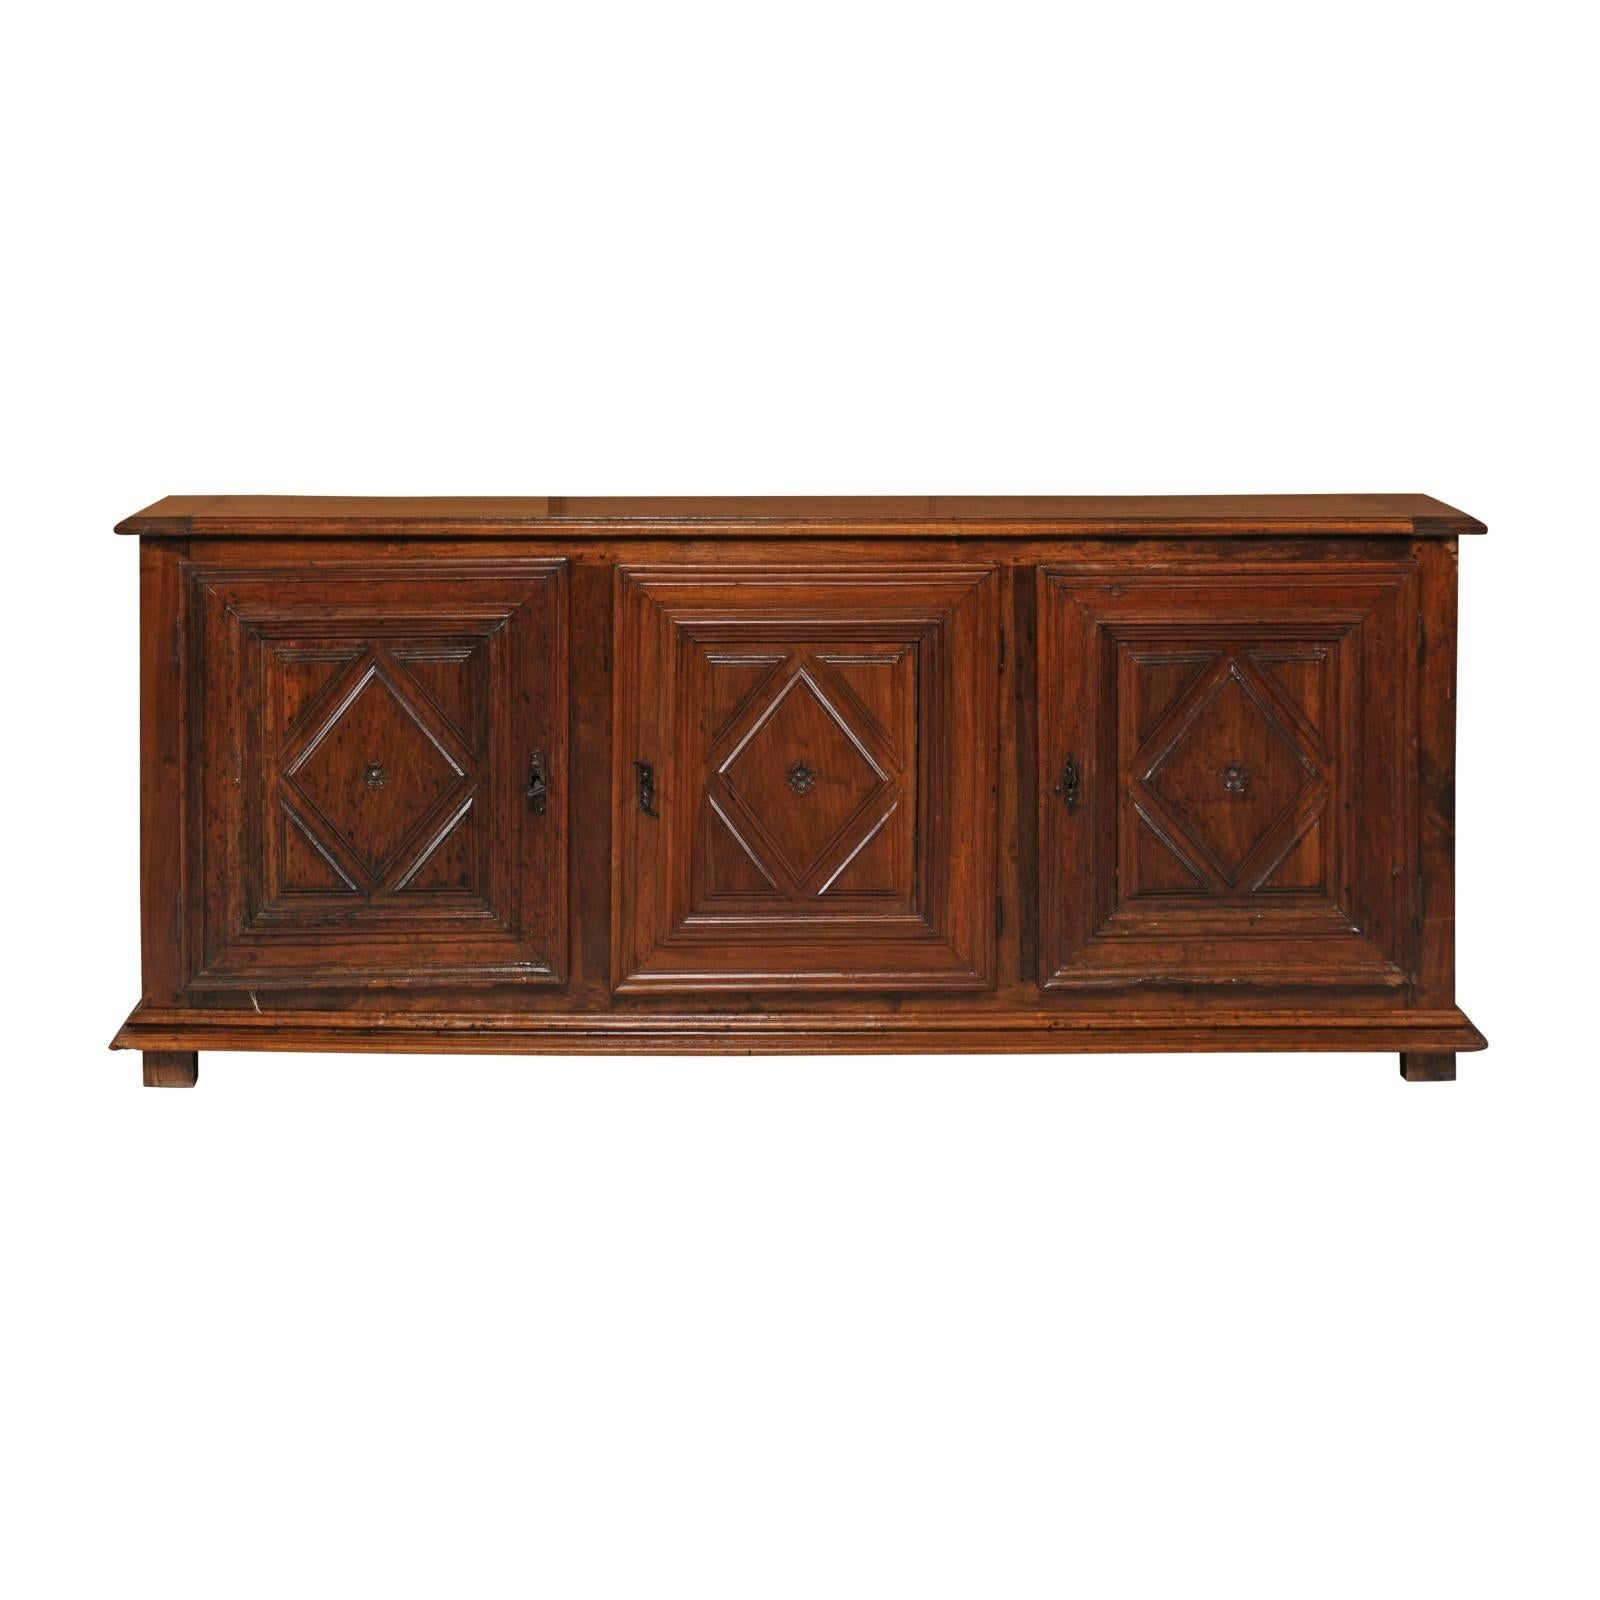 Italian Three-Door Chestnut Wood Enfilade with Diamond Motifs from the 1820s